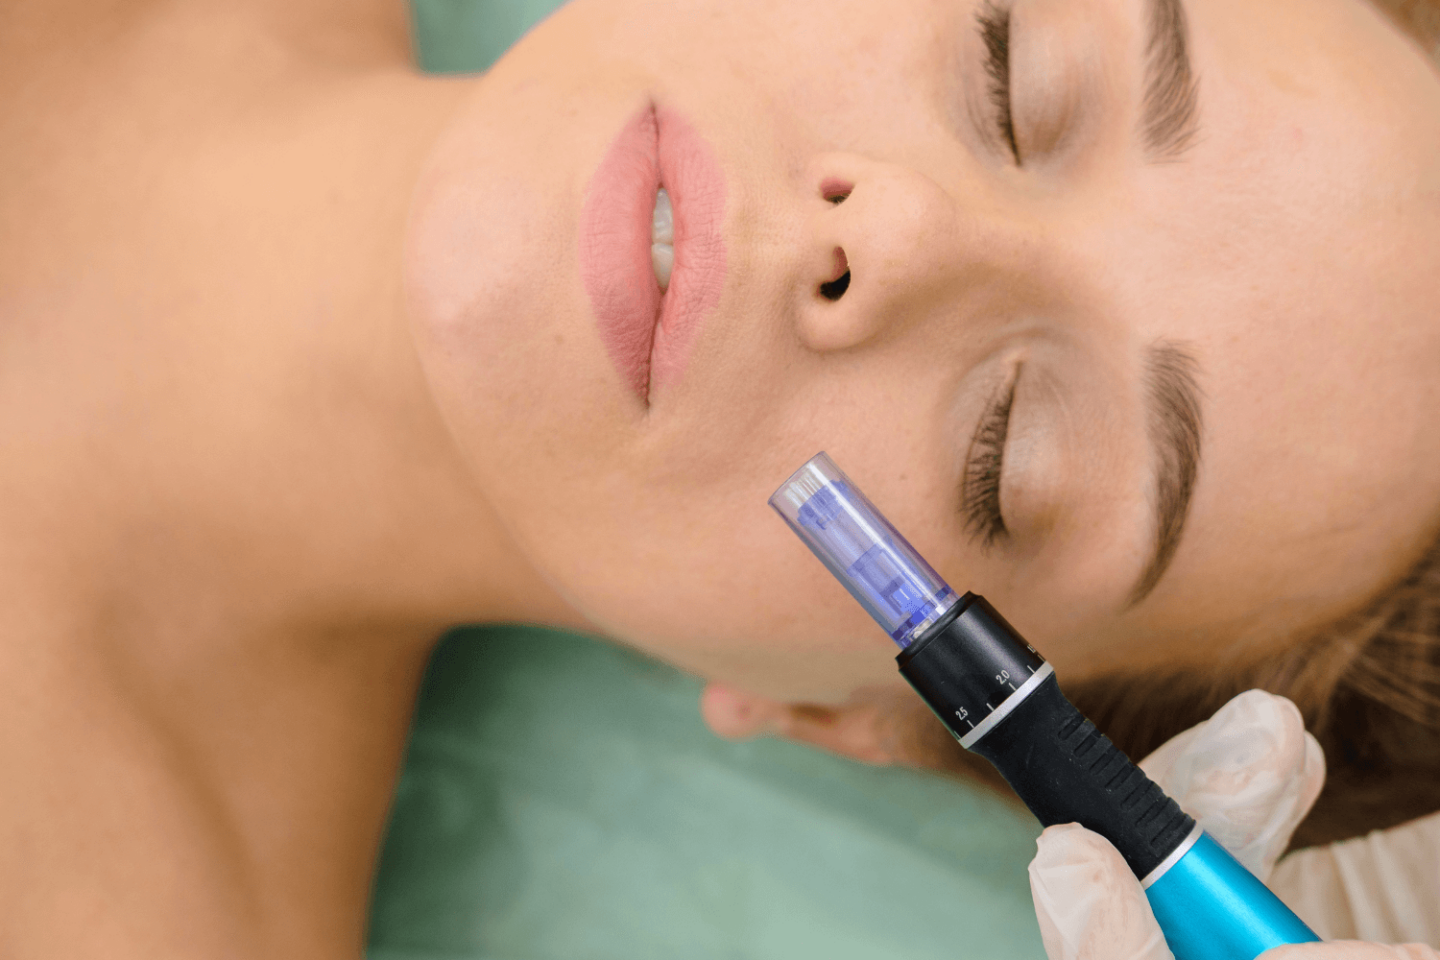 Woman receiving treatment with microneedling pens